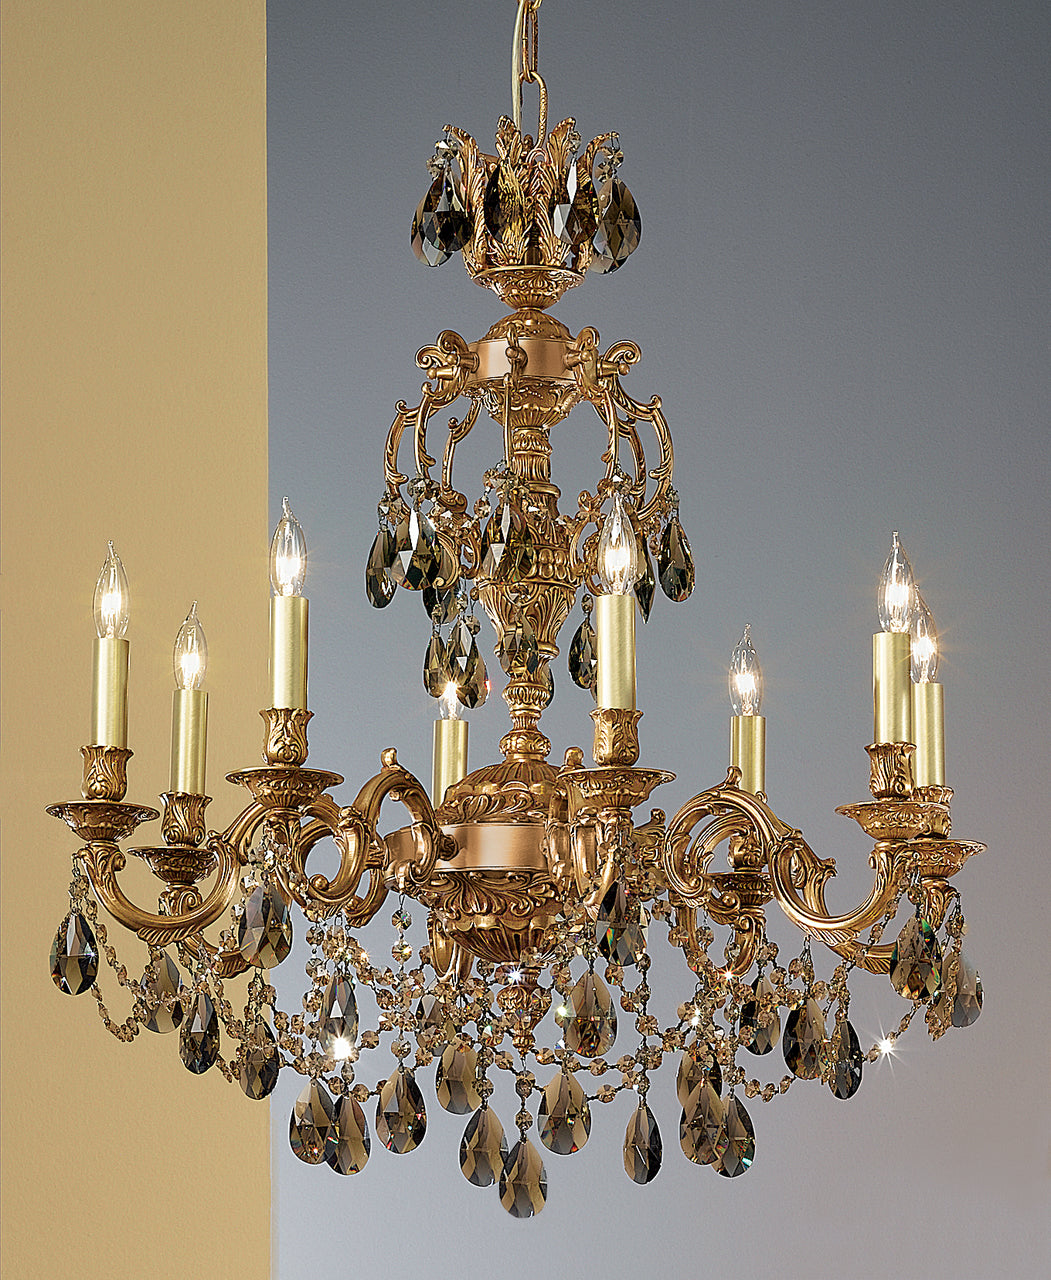 Classic Lighting 57388 AGB SGT Chateau Imperial Crystal Chandelier in Aged Bronze (Imported from Spain)